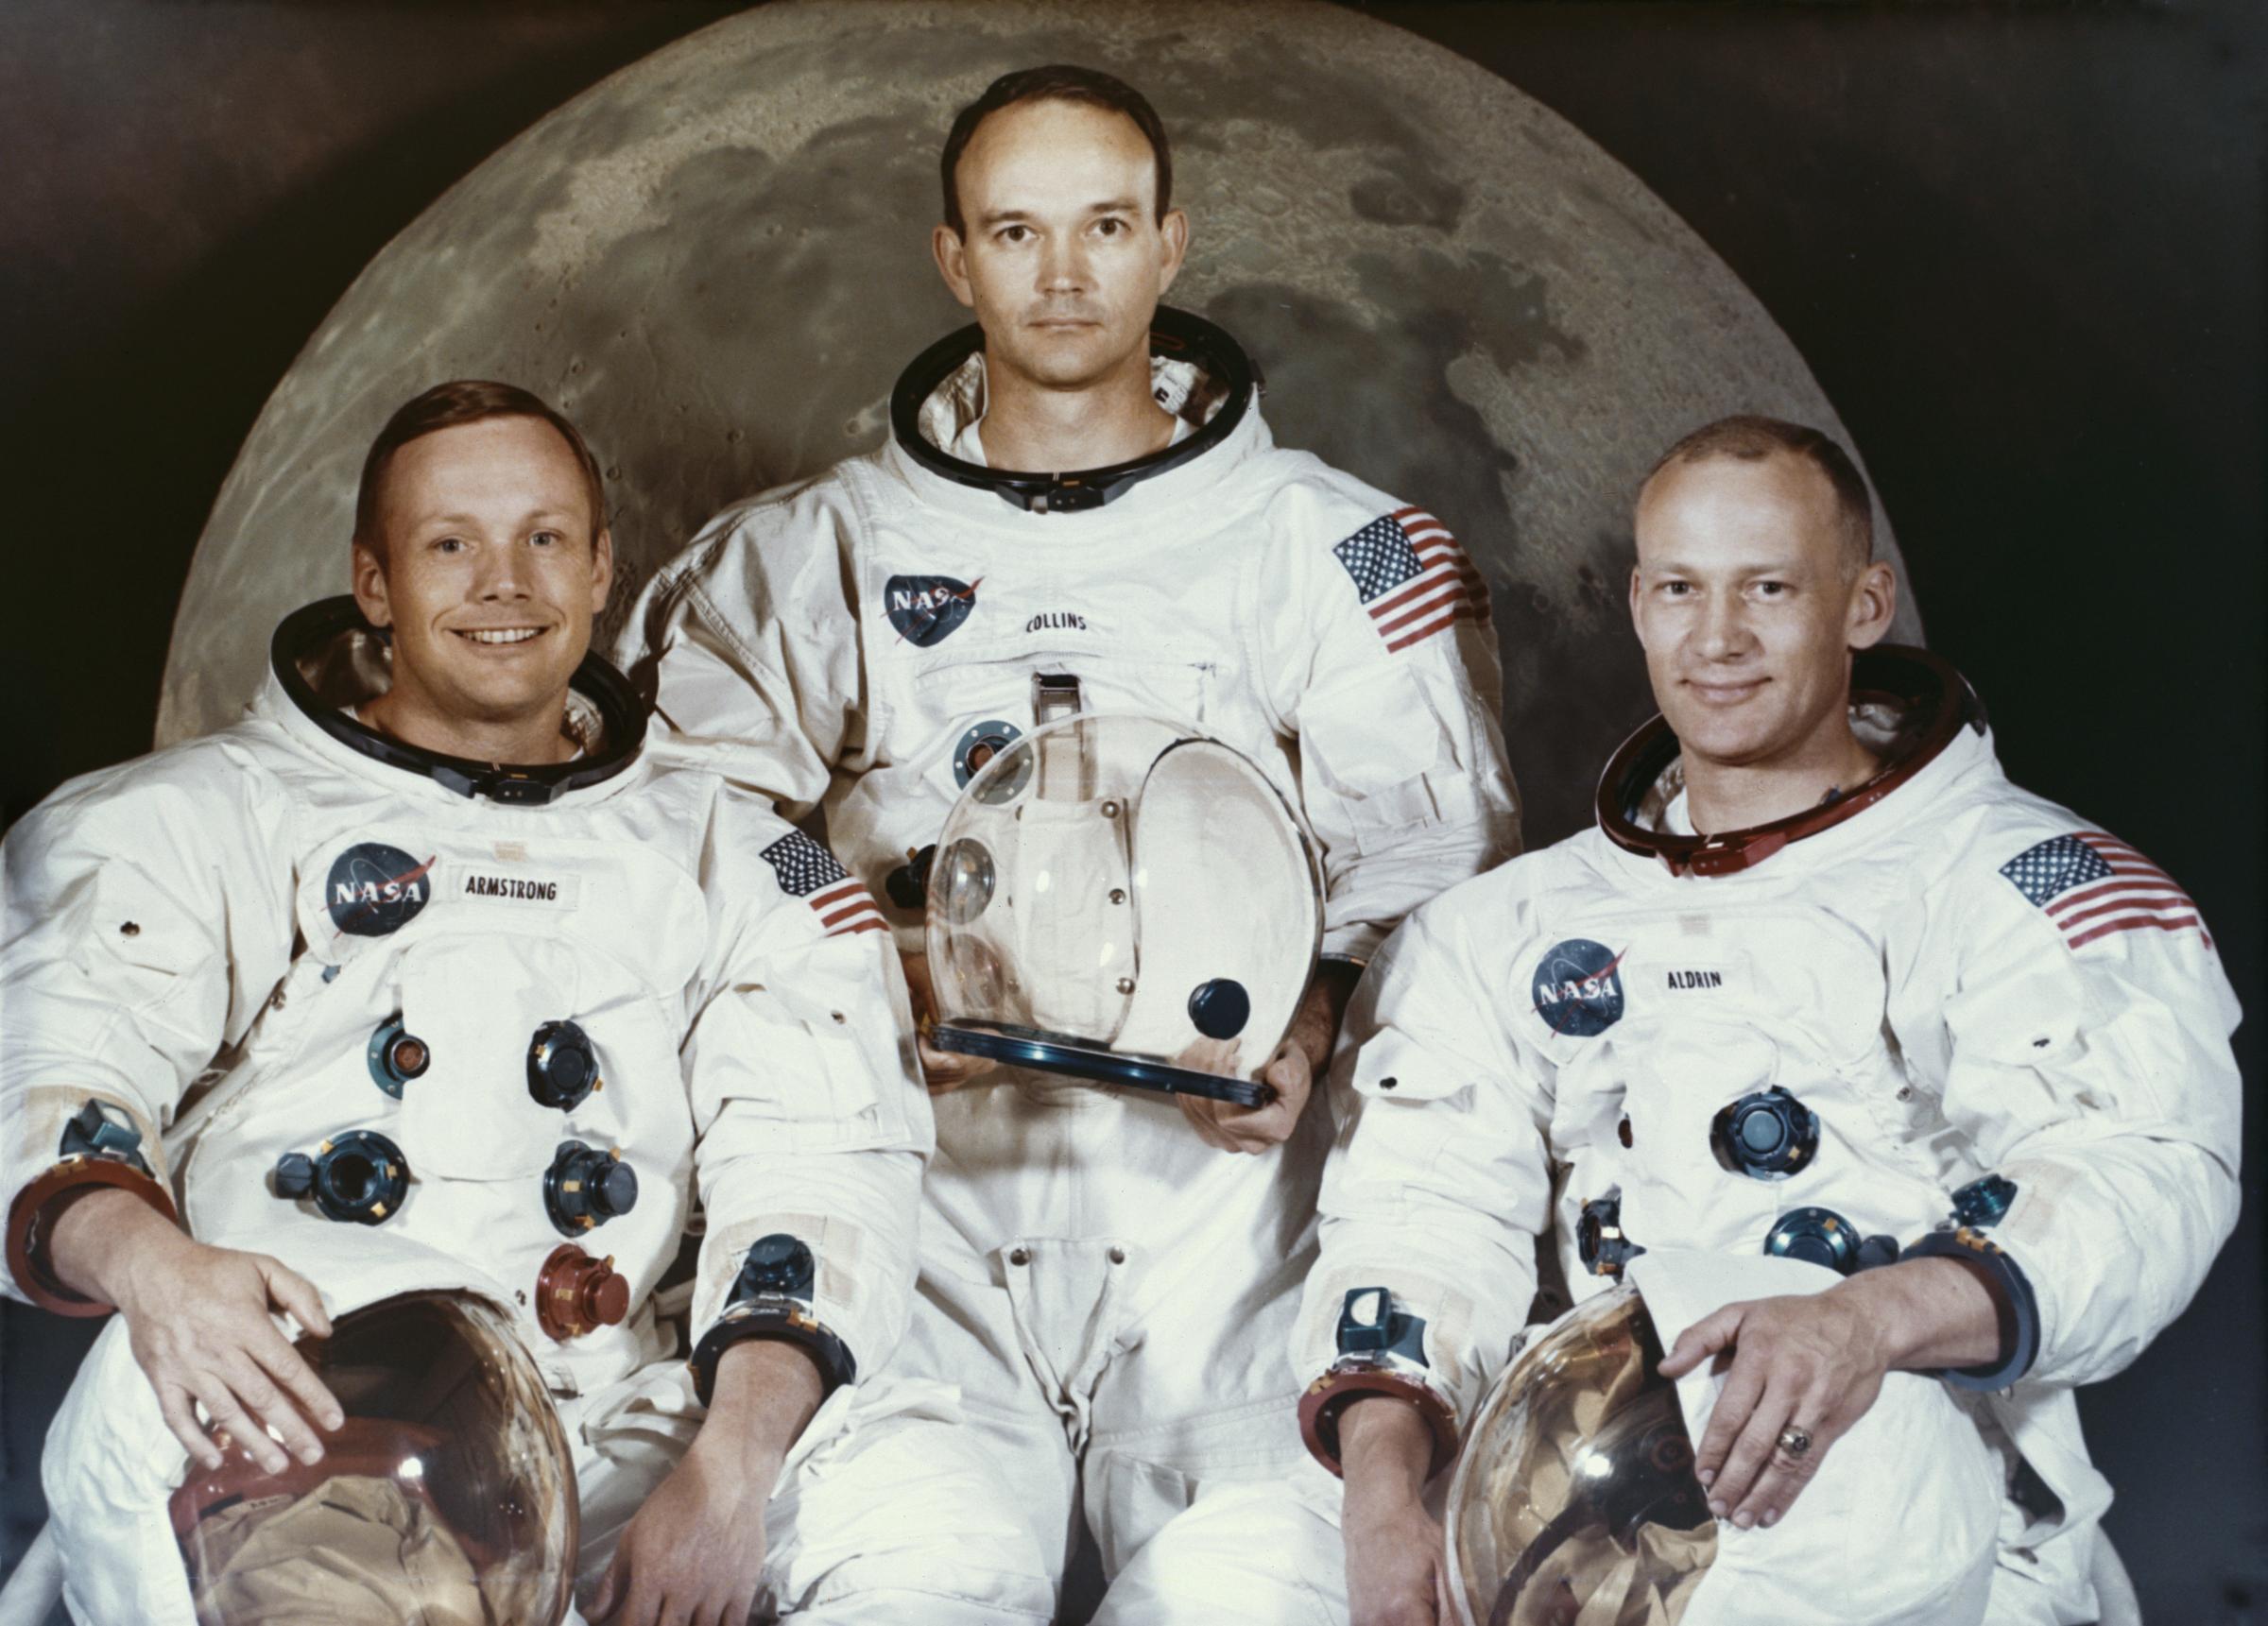 Obituary: Michael Collins, astronaut who was part of Apollo 11 mission that saw Man walk on the moon